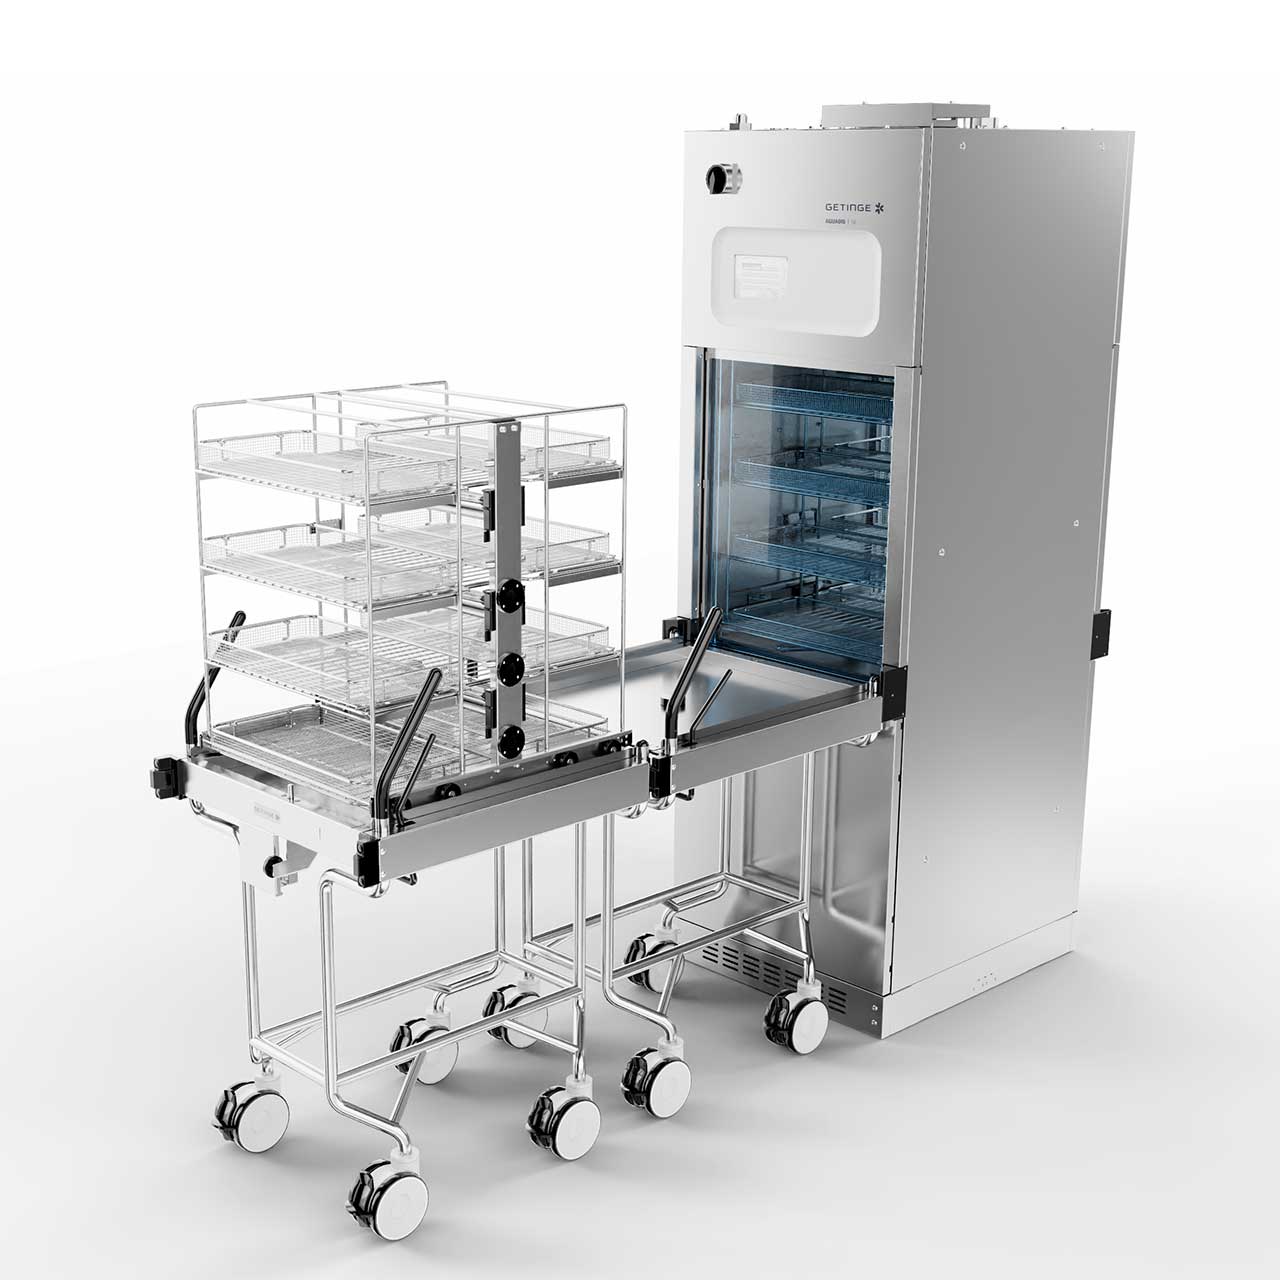 A line of carefully designed trolleys that takes loading and distribution of instruments to a completely new level